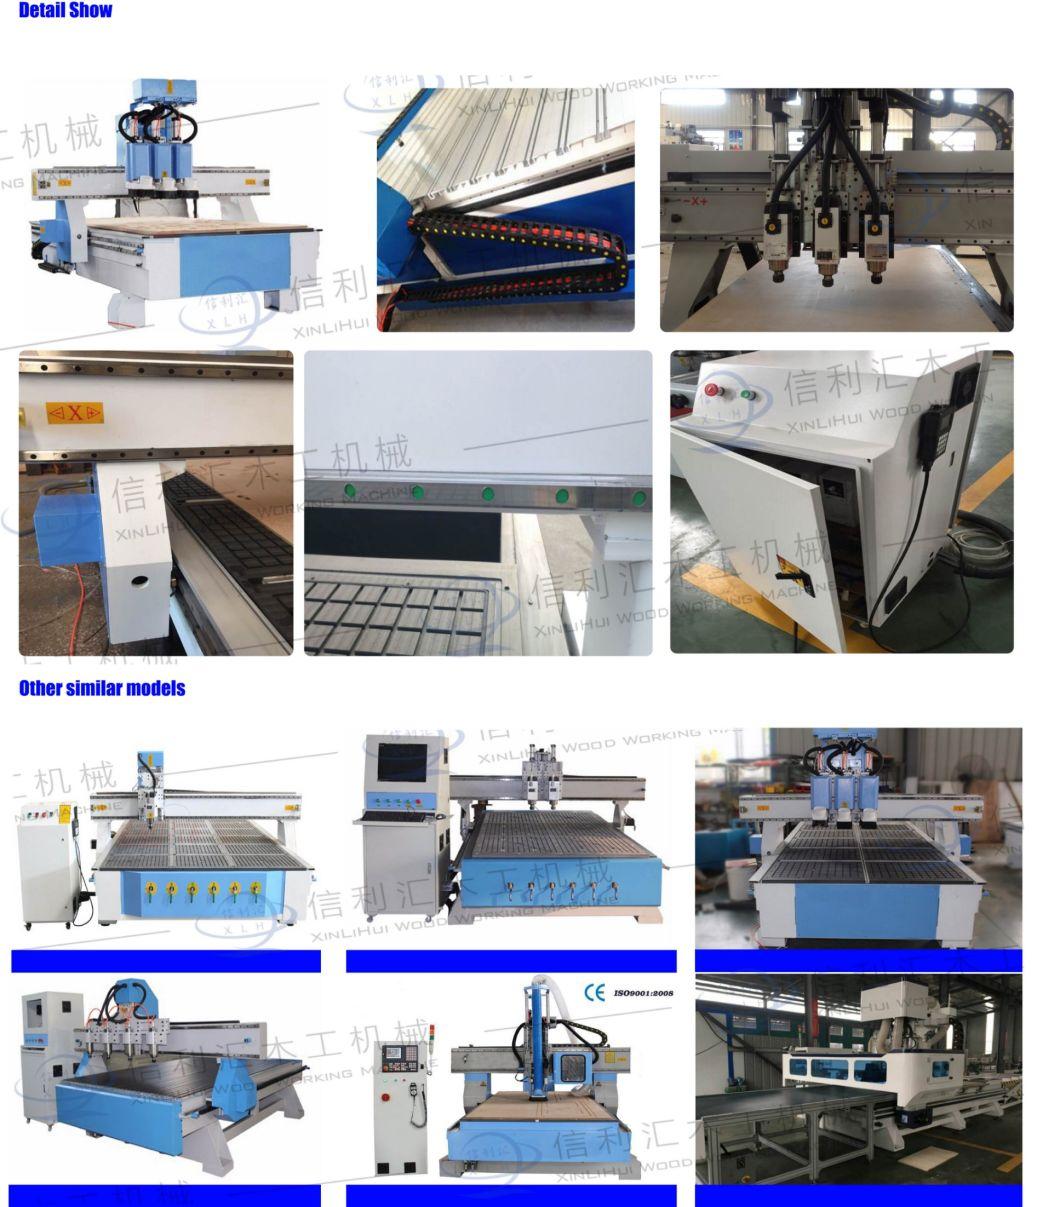 Four Cutters CNC Seat Mortising Machine Cutter Head Wood Curving Machine CNC Router 1300 mm X 2500 mm Minimum Work Table. Economical Power